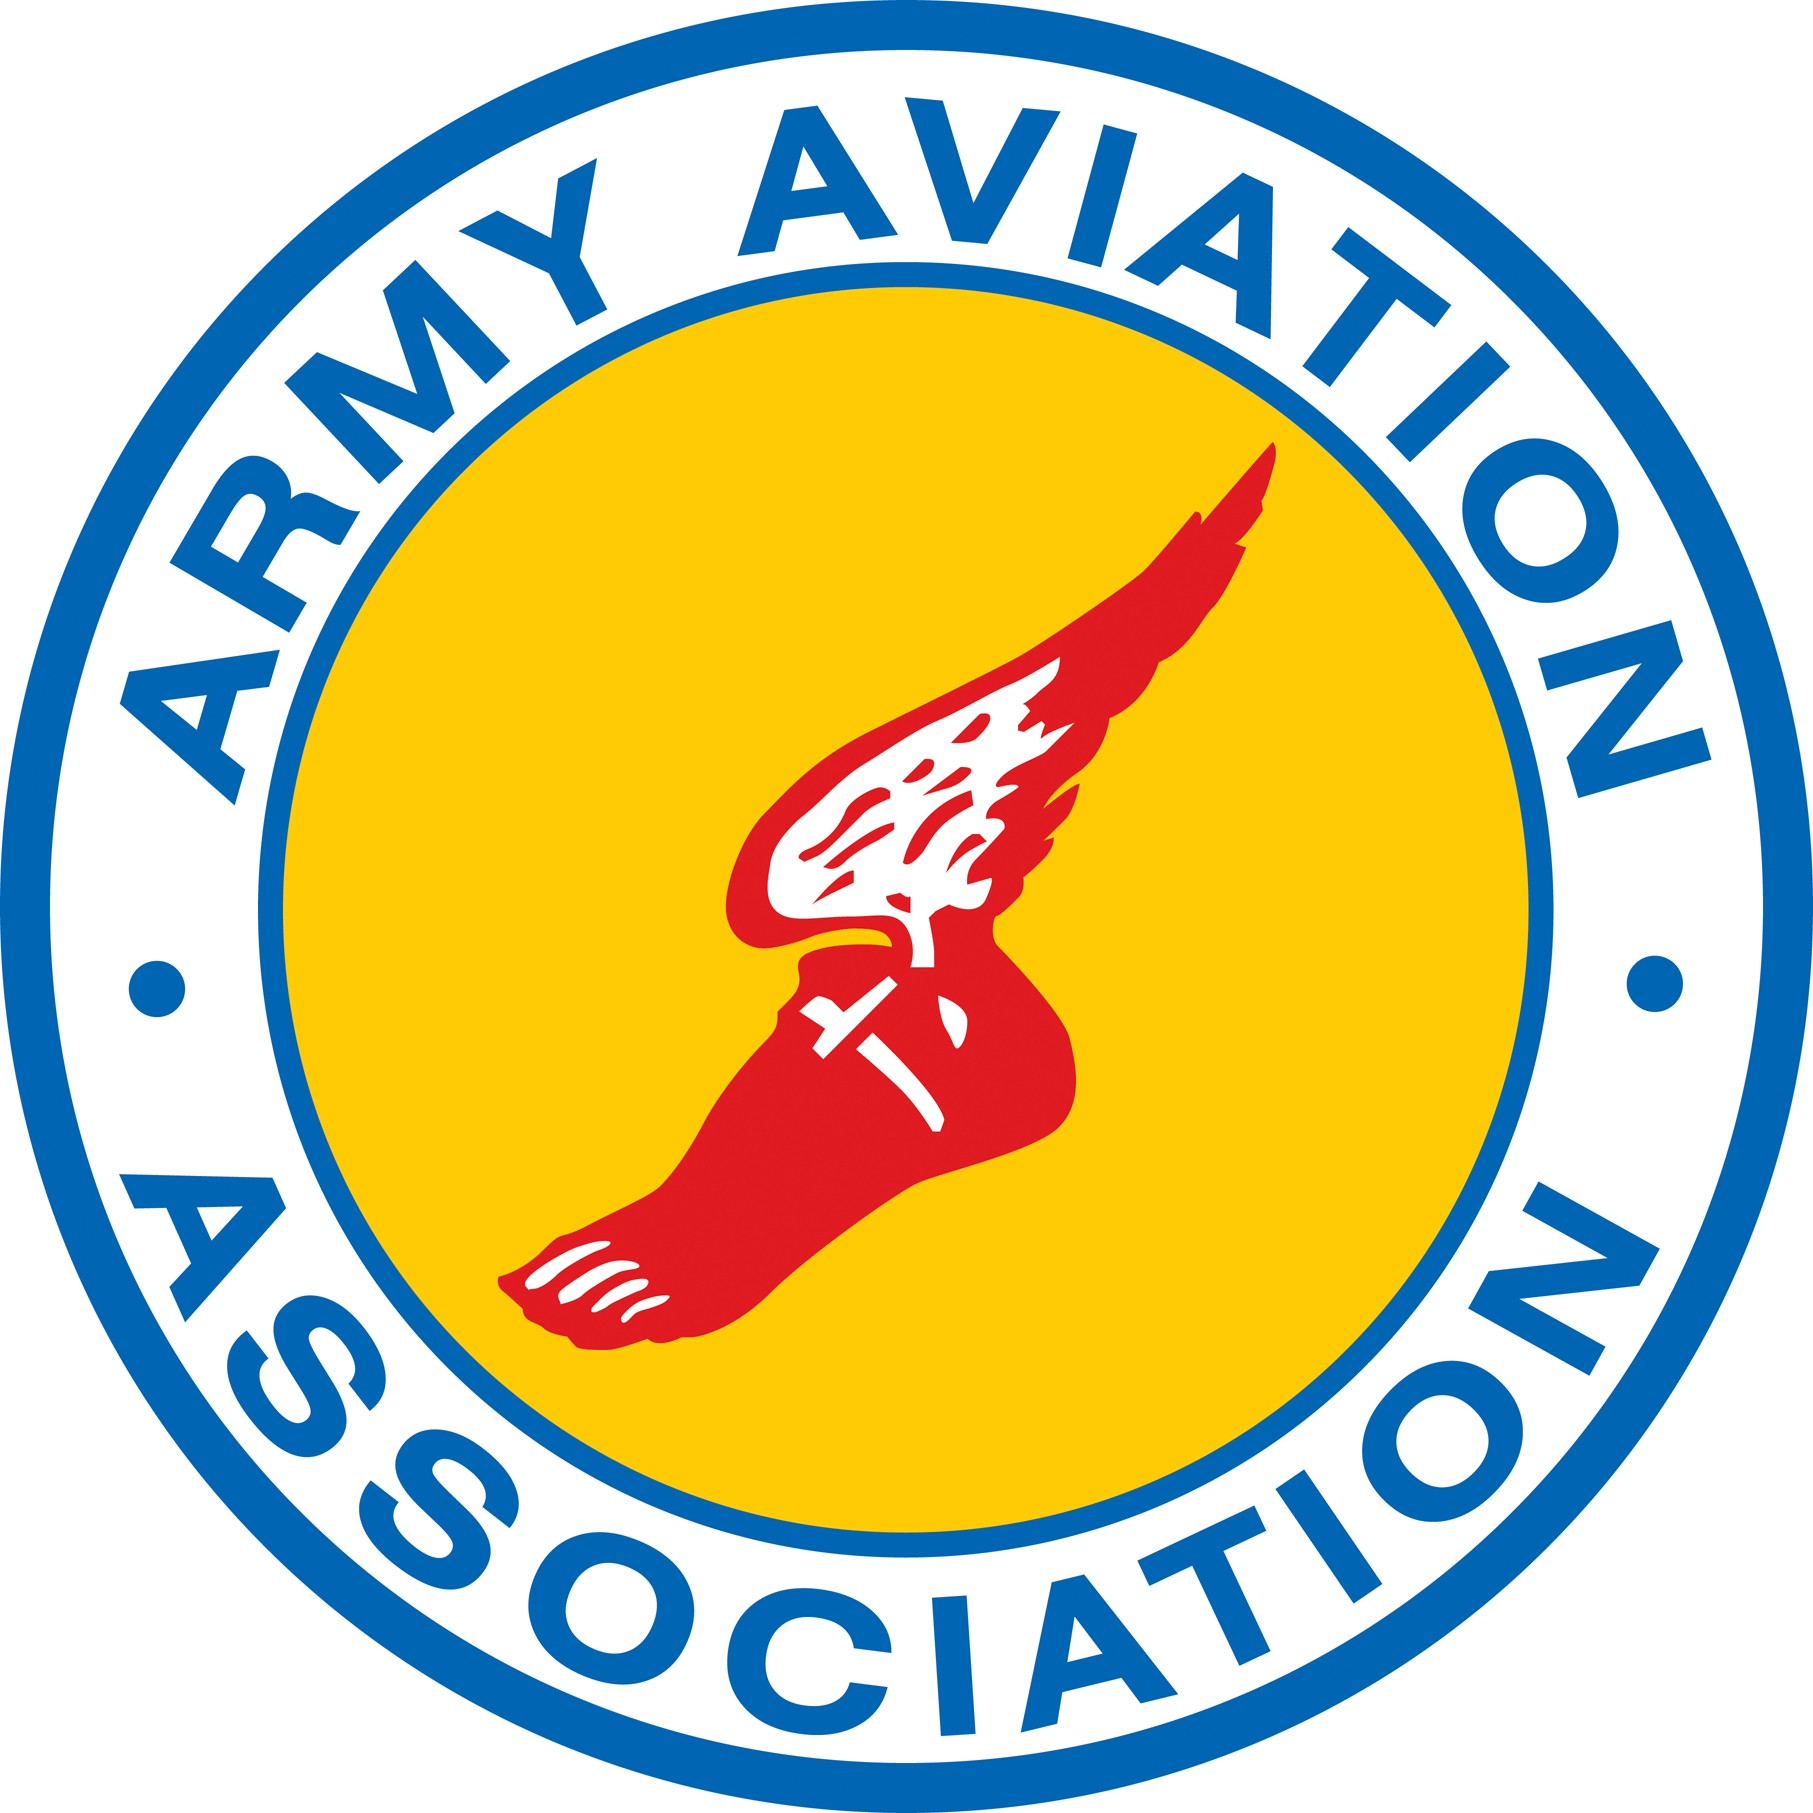 358 Aviation Operations Battalion wins Air Traffic Control Unit of the